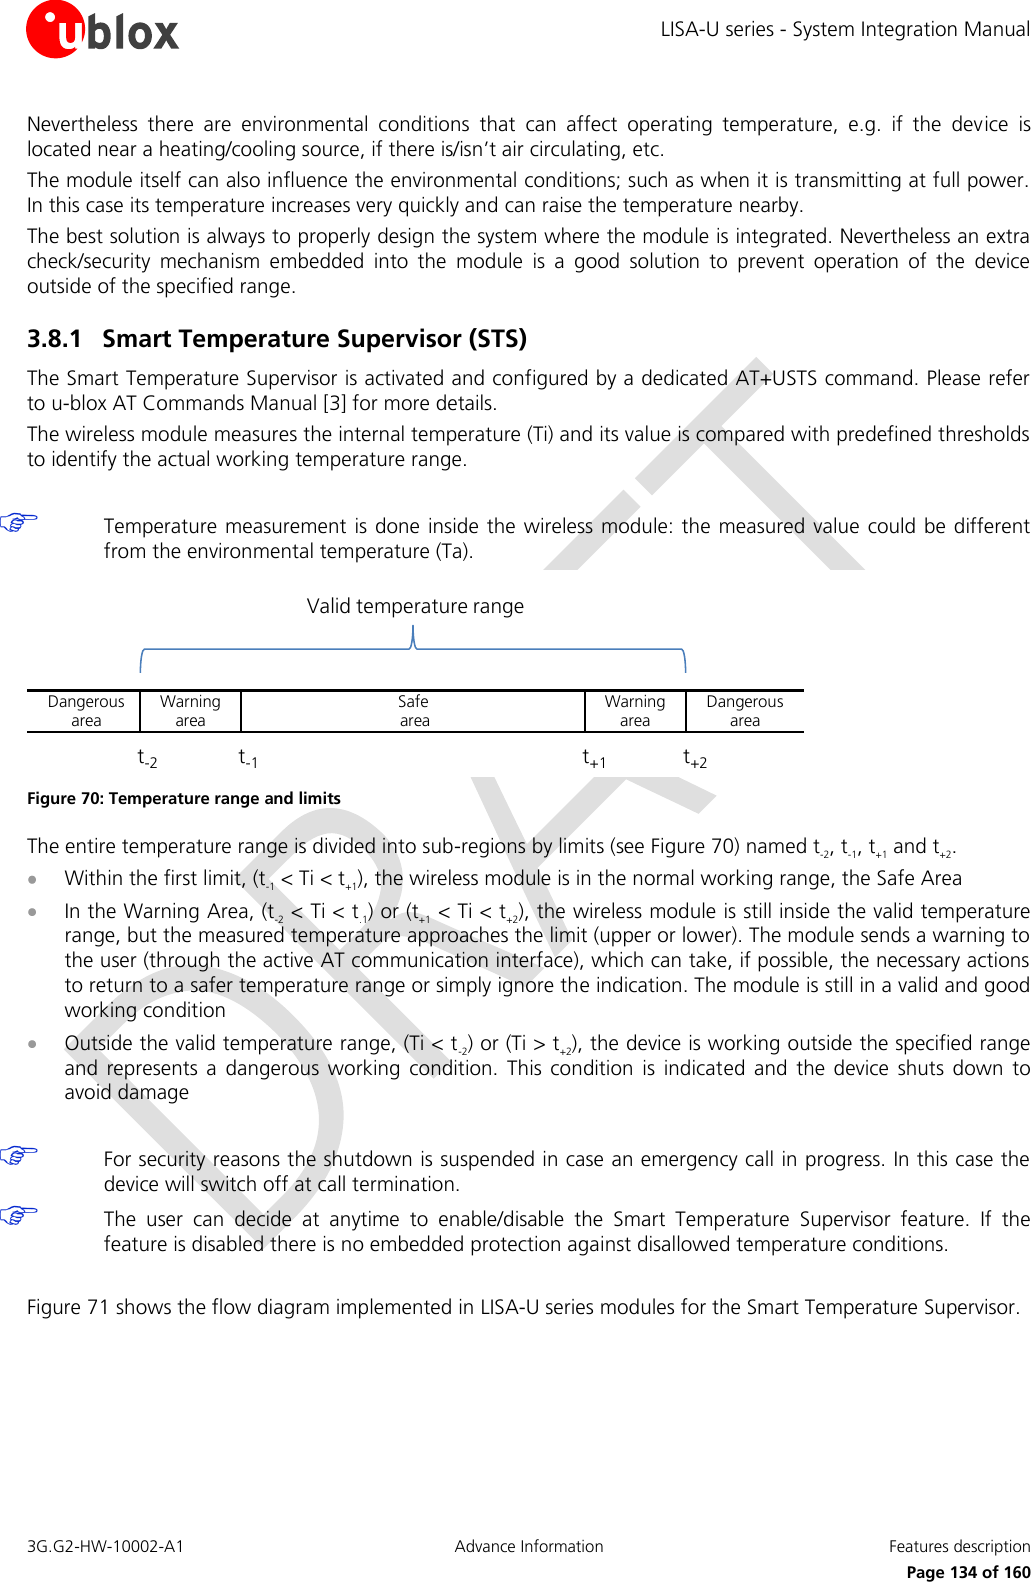 LISA-U series - System Integration Manual 3G.G2-HW-10002-A1  Advance Information  Features description      Page 134 of 160 Nevertheless  there  are  environmental  conditions  that  can  affect  operating  temperature,  e.g.  if  the  device  is located near a heating/cooling source, if there is/isn’t air circulating, etc. The module itself can also influence the environmental conditions; such as when it is transmitting at full power. In this case its temperature increases very quickly and can raise the temperature nearby. The best solution is always to properly design the system where the module is integrated. Nevertheless an extra check/security  mechanism  embedded  into  the  module  is  a  good  solution  to  prevent  operation  of  the  device outside of the specified range. 3.8.1 Smart Temperature Supervisor (STS) The Smart Temperature Supervisor is activated and configured by a dedicated AT+USTS command. Please refer to u-blox AT Commands Manual [3] for more details. The wireless module measures the internal temperature (Ti) and its value is compared with predefined thresholds to identify the actual working temperature range.   Temperature  measurement is done inside the  wireless module: the  measured value  could be different from the environmental temperature (Ta). Warningareat-1 t+1 t+2t-2Valid temperature rangeSafeareaDangerousarea Dangerousarea Warningarea Figure 70: Temperature range and limits The entire temperature range is divided into sub-regions by limits (see Figure 70) named t-2, t-1, t+1 and t+2.  Within the first limit, (t-1 &lt; Ti &lt; t+1), the wireless module is in the normal working range, the Safe Area  In the Warning Area, (t-2 &lt; Ti &lt; t.1) or (t+1 &lt; Ti &lt; t+2), the wireless module is still inside the valid temperature range, but the measured temperature approaches the limit (upper or lower). The module sends a warning to the user (through the active AT communication interface), which can take, if possible, the necessary actions to return to a safer temperature range or simply ignore the indication. The module is still in a valid and good working condition  Outside the valid temperature range, (Ti &lt; t-2) or (Ti &gt; t+2), the device is working outside the specified range and  represents  a  dangerous  working  condition.  This  condition  is  indicated  and  the  device  shuts  down  to avoid damage   For security reasons the shutdown is suspended in case an emergency call in progress. In this case the device will switch off at call termination.  The  user  can  decide  at  anytime  to  enable/disable  the  Smart  Temperature  Supervisor  feature.  If  the feature is disabled there is no embedded protection against disallowed temperature conditions.  Figure 71 shows the flow diagram implemented in LISA-U series modules for the Smart Temperature Supervisor.  